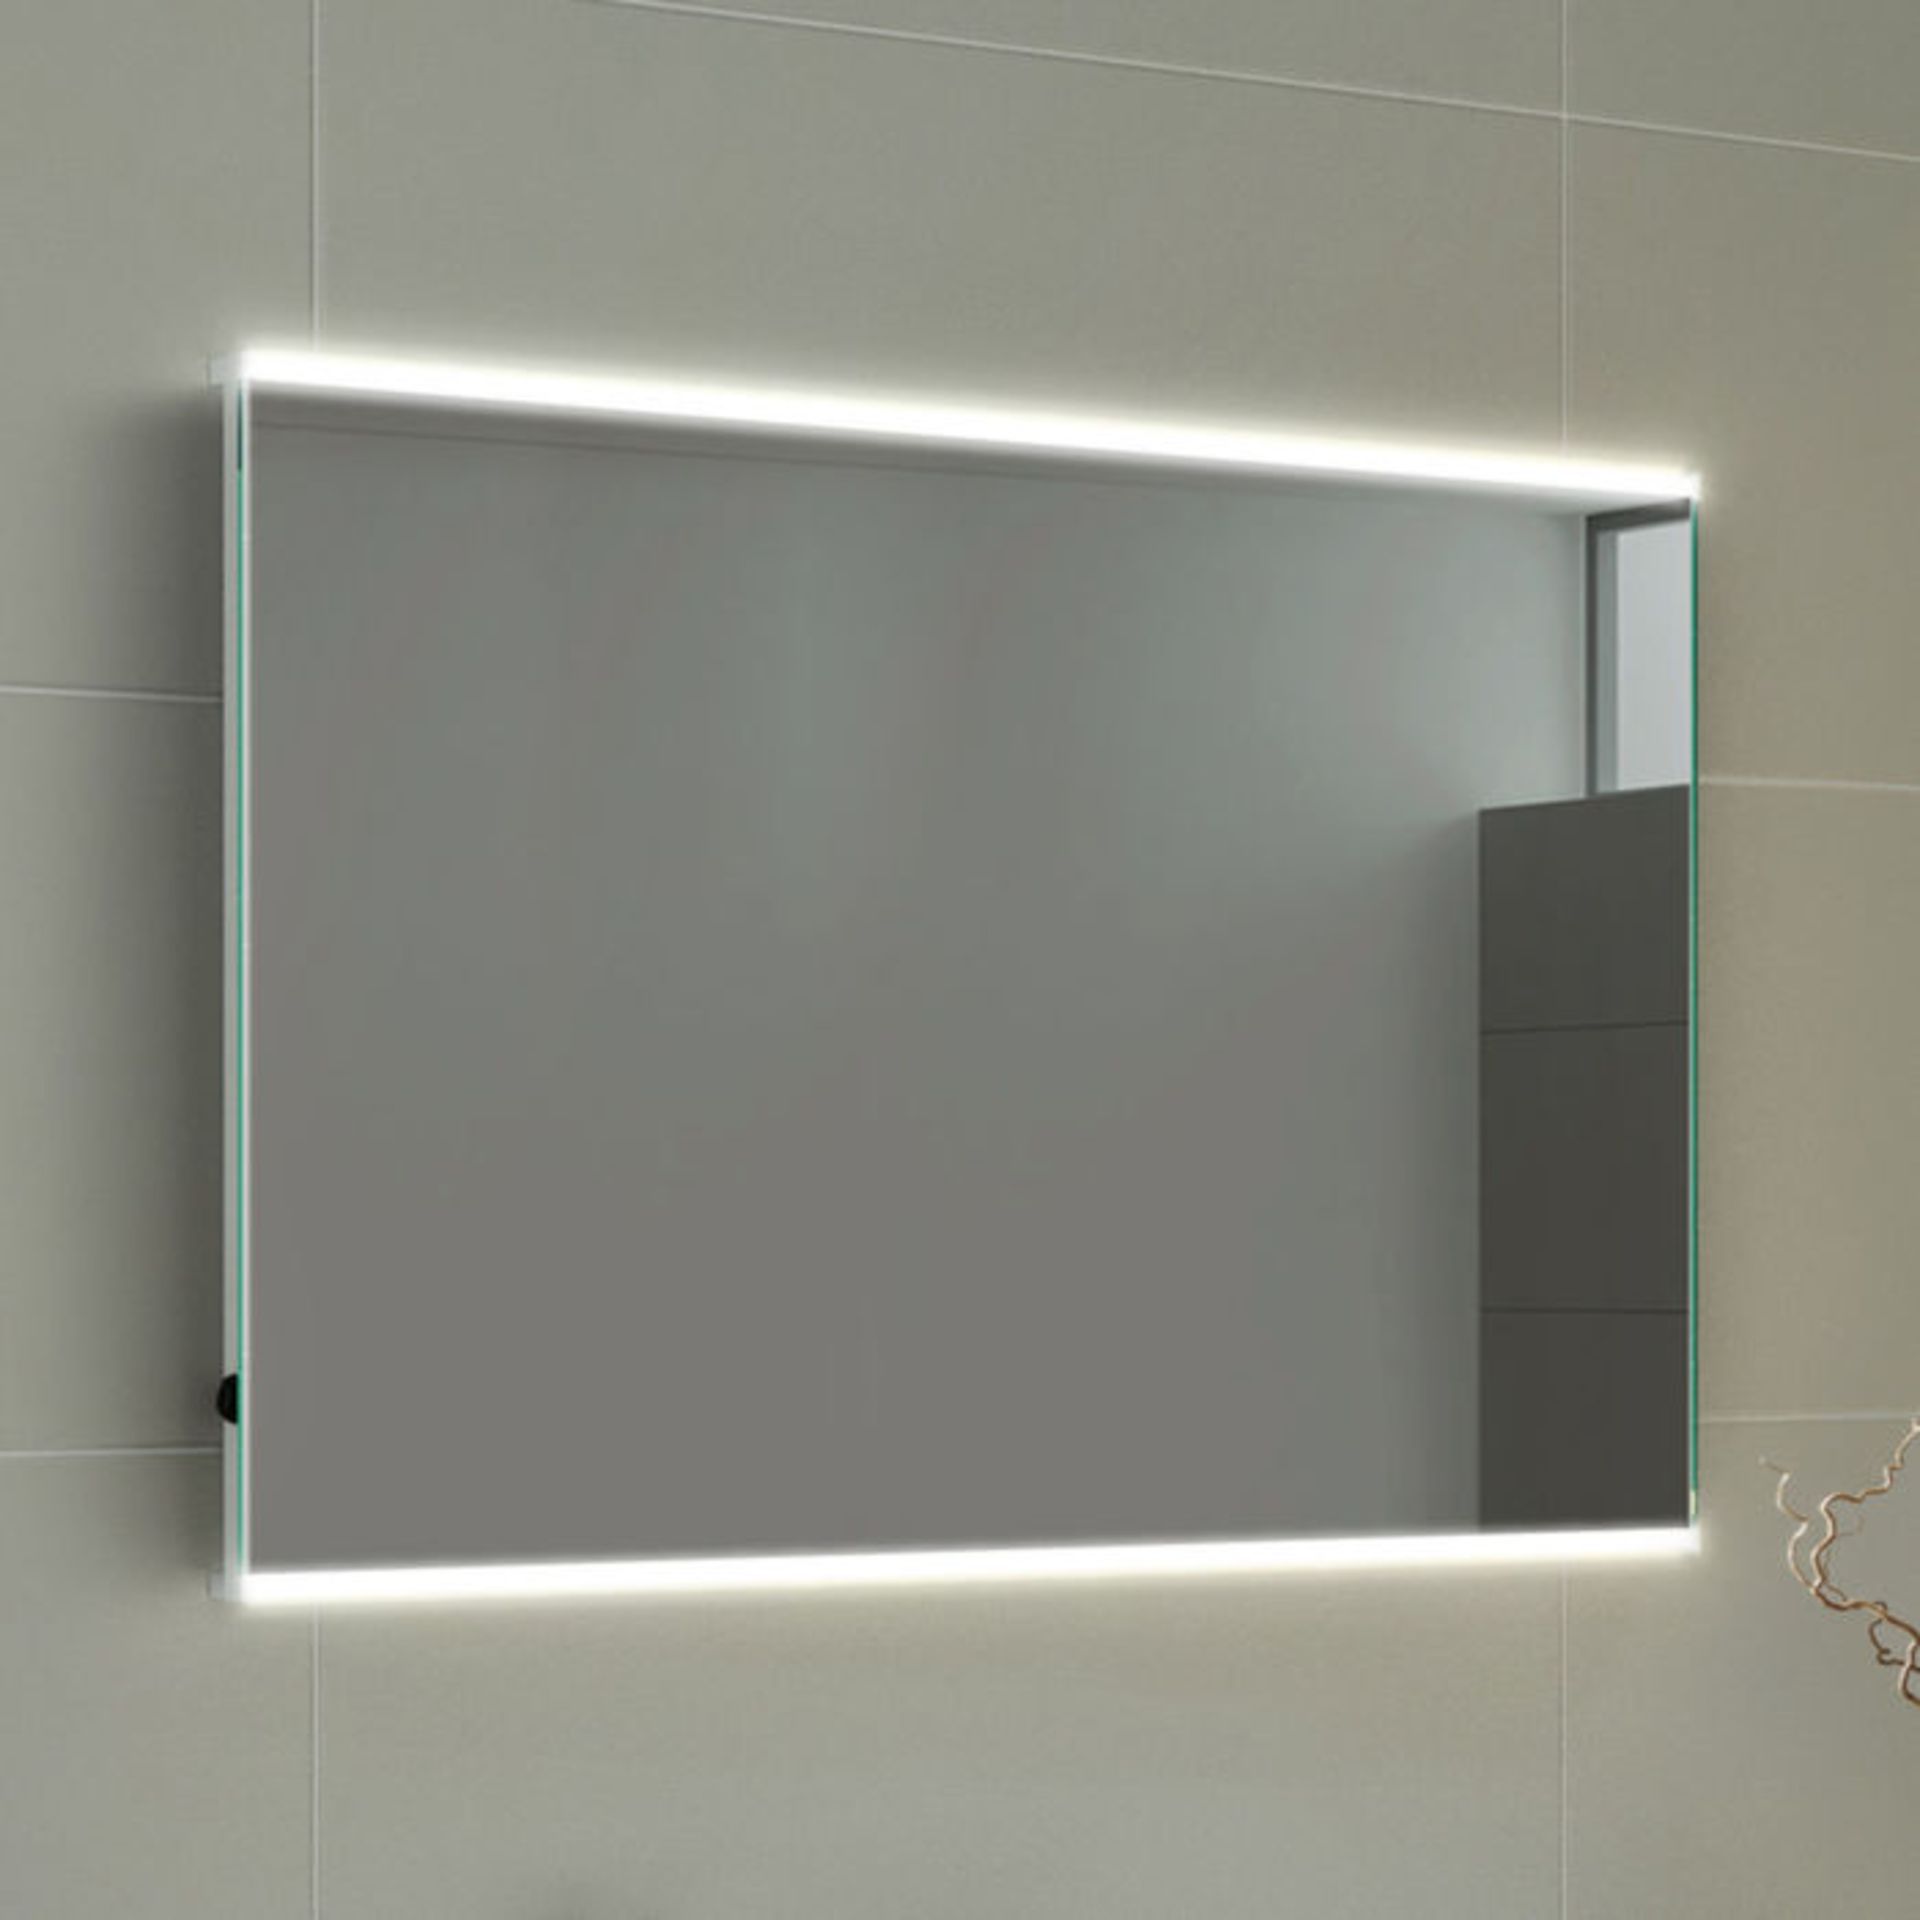 (ZL177) 500x700mm Denver Illuminated LED Mirror - Battery Operated. Energy saving controlled On / - Image 2 of 4